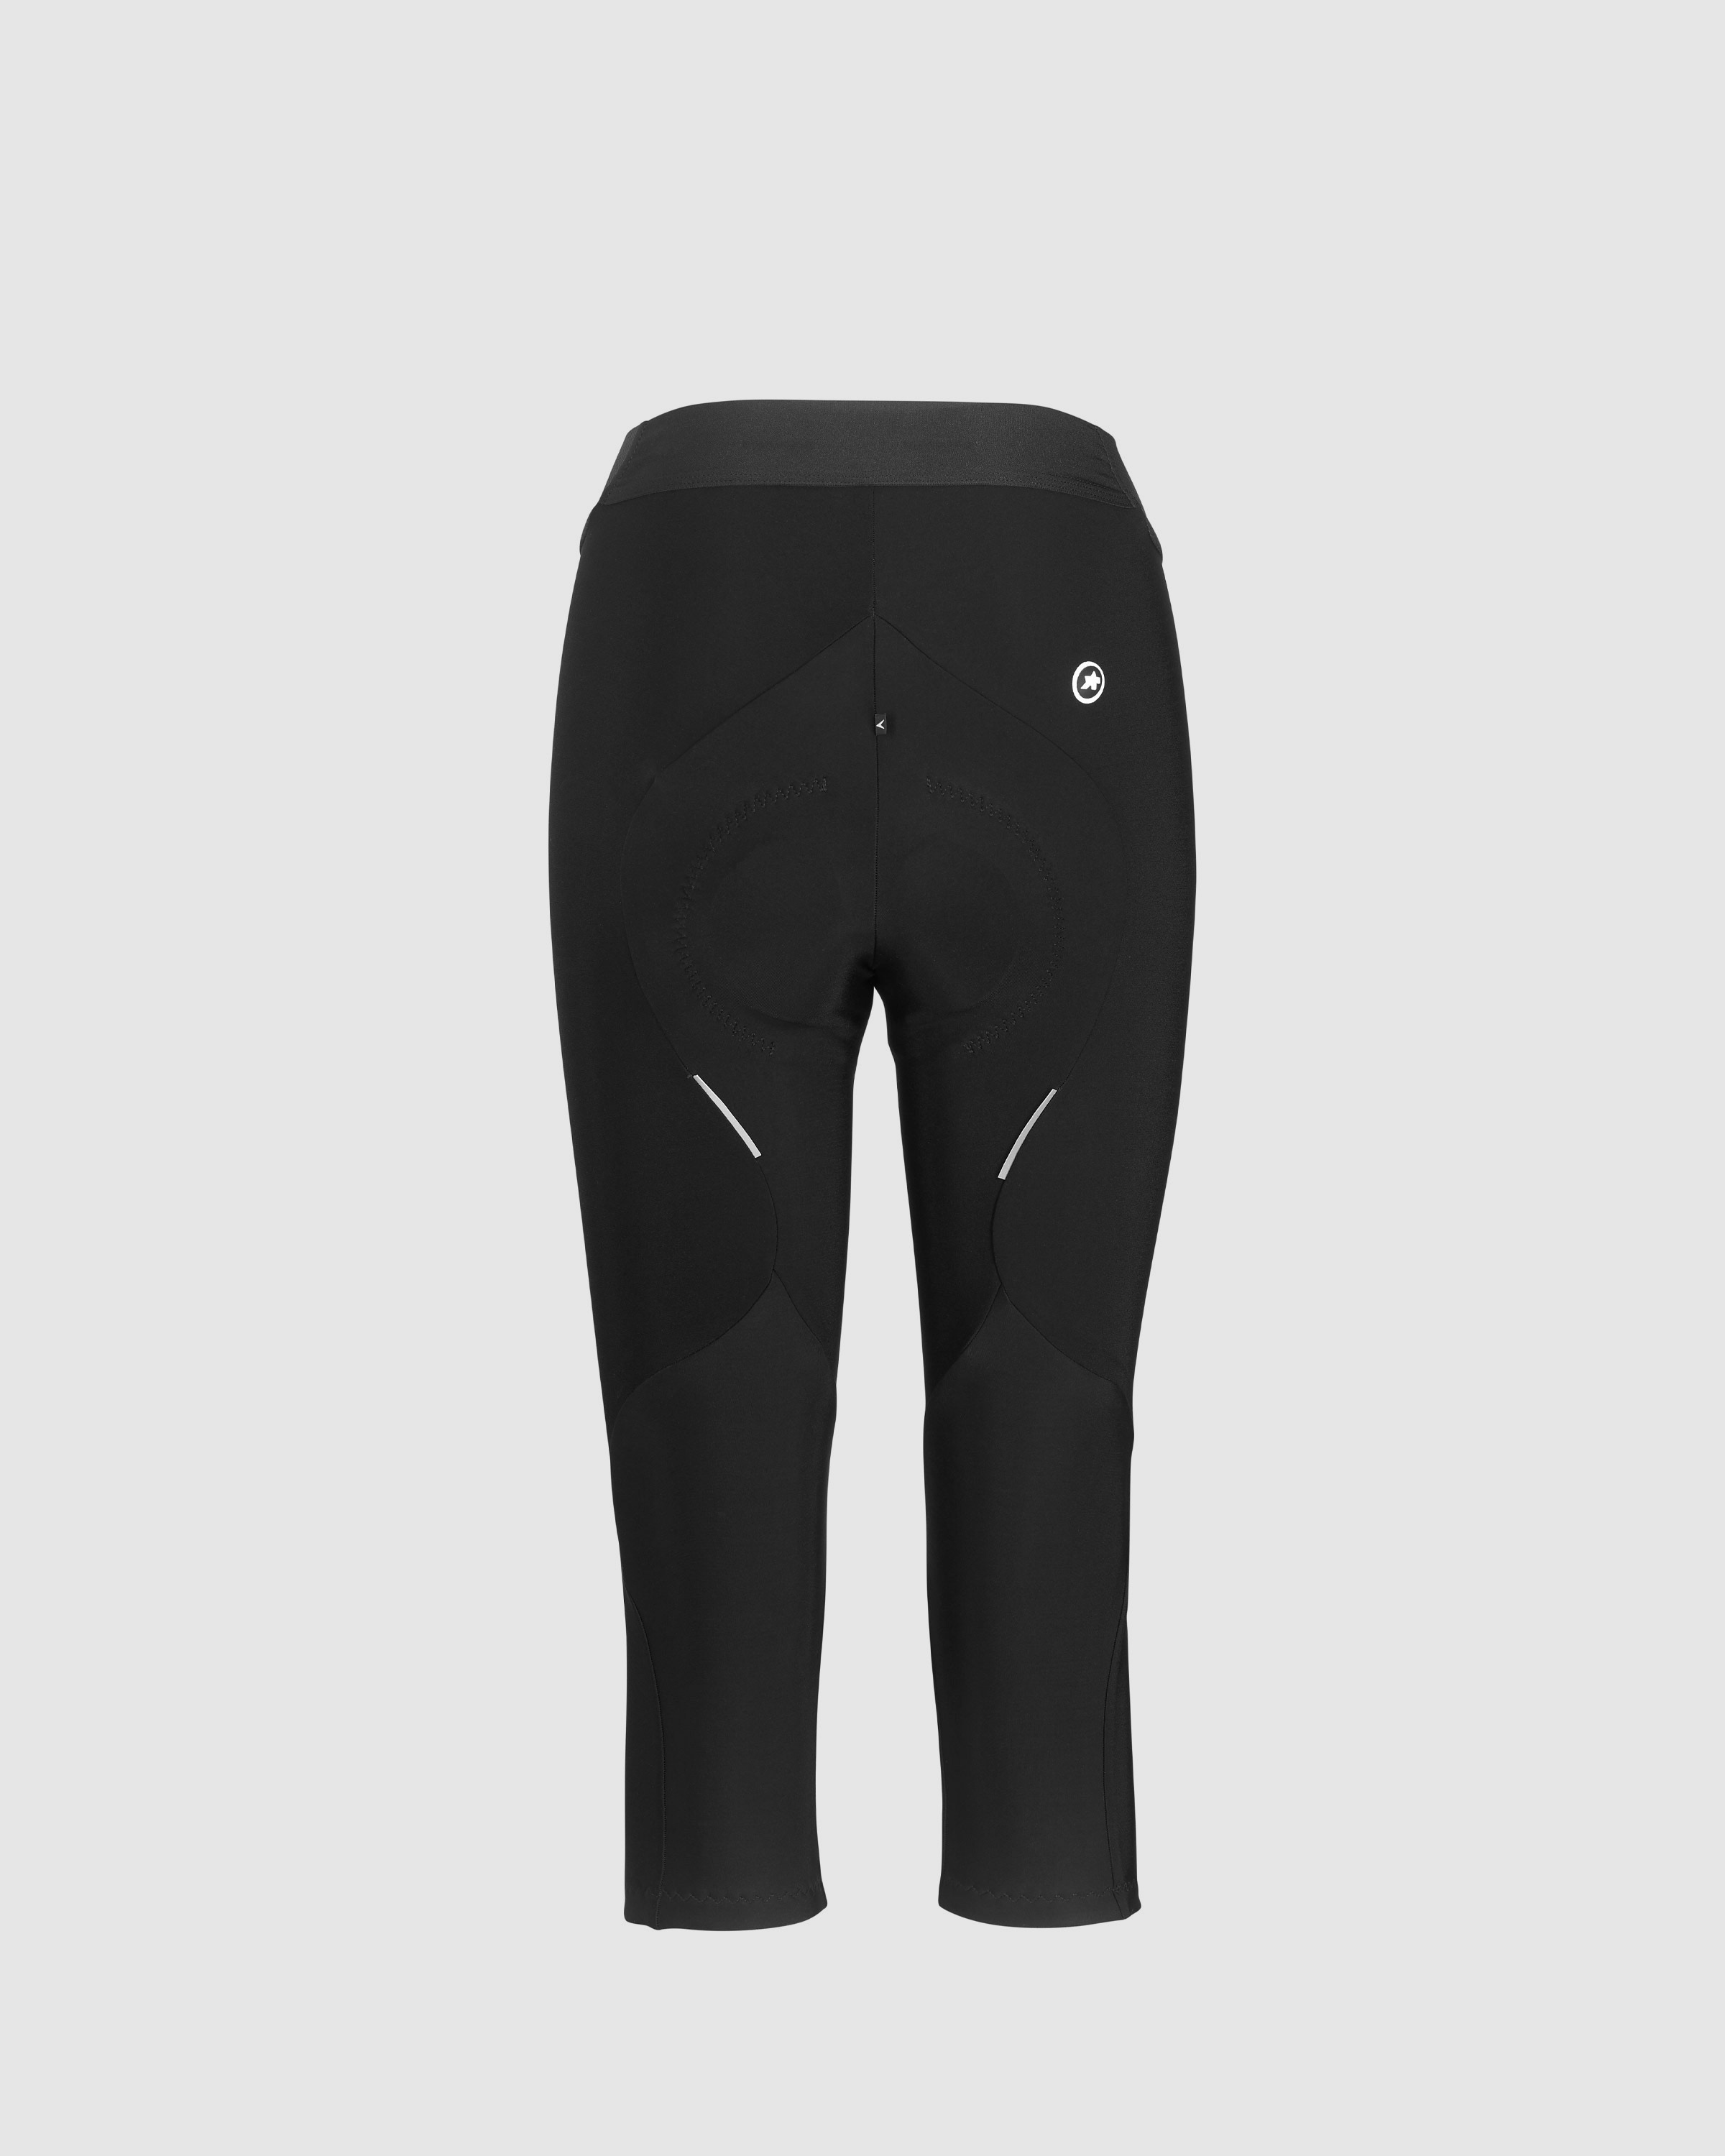 UMA GT Spring Fall Half Knickers - ASSOS Of Switzerland - Official Outlet